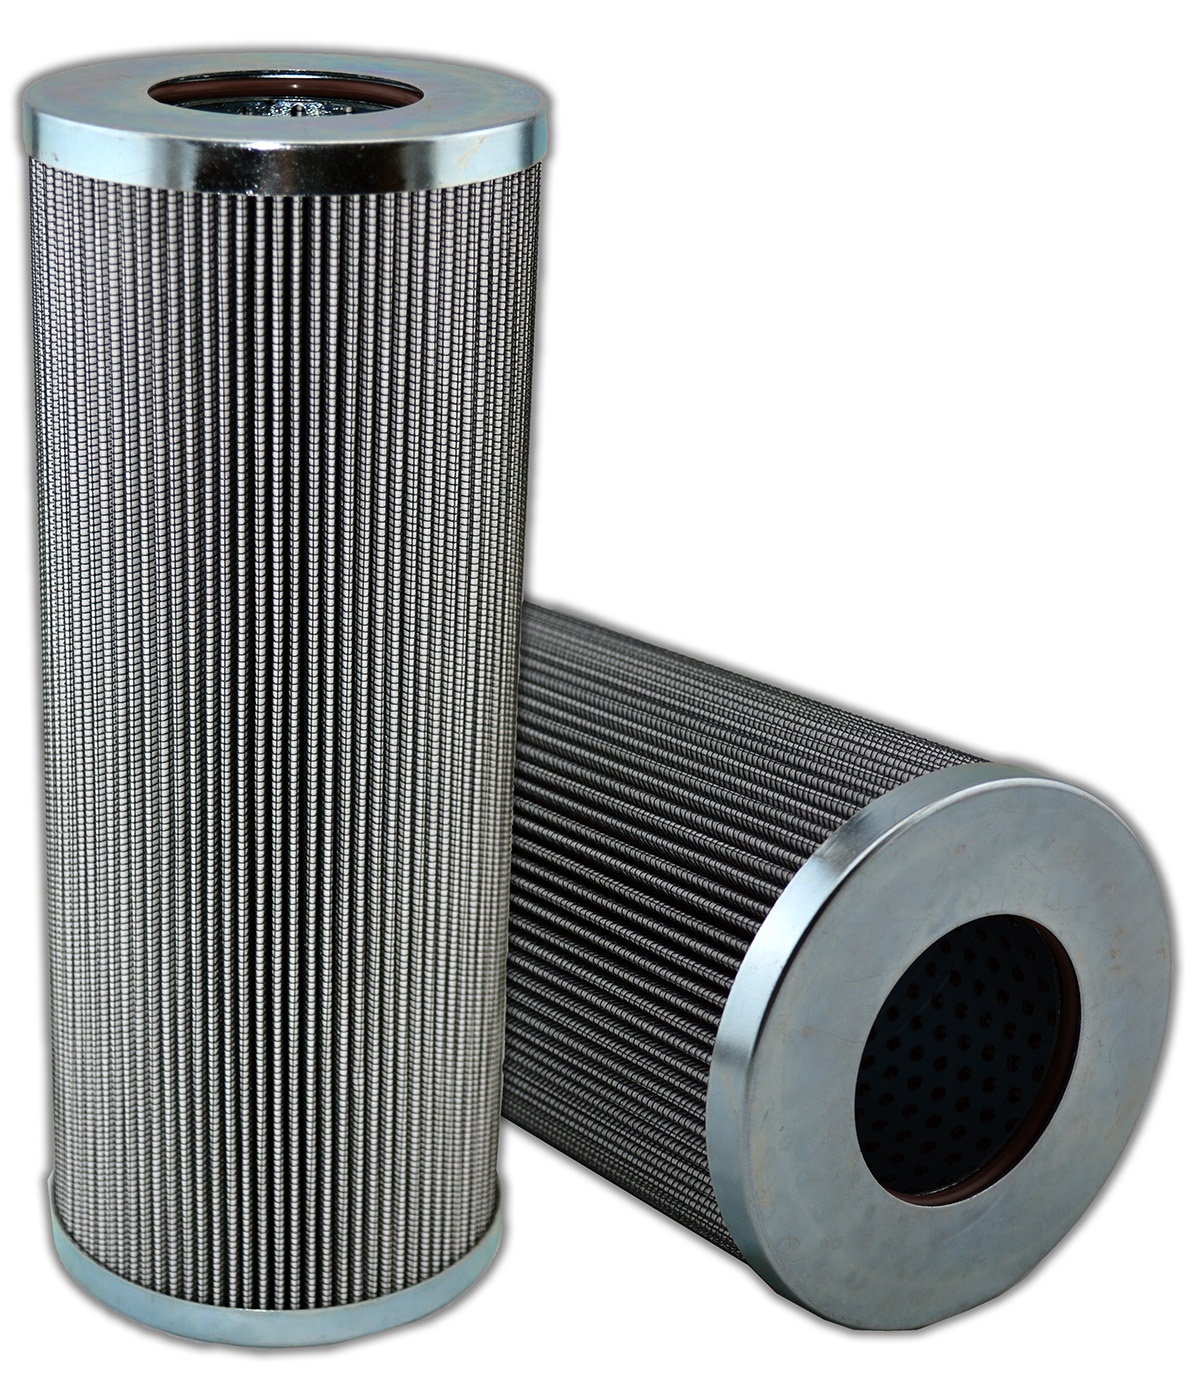 Interchange Hydraulic Filter, Glass, 5 Micron Rating, Viton Seal, 9.84 Inch Height